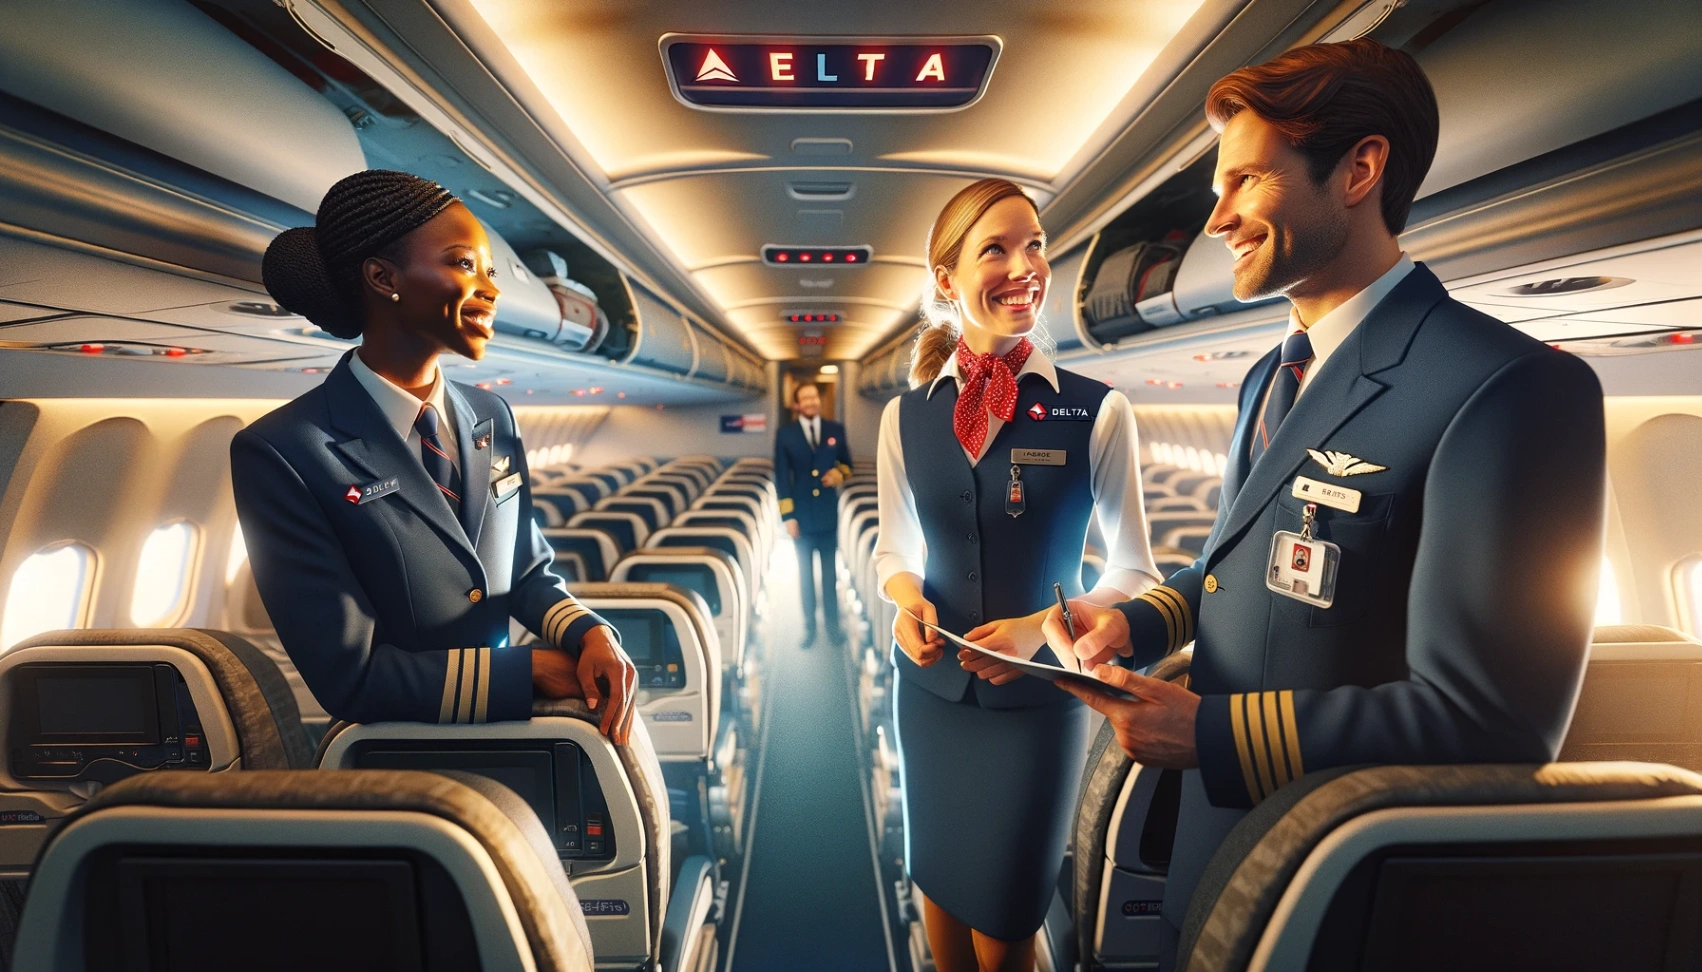 Delta Air Lines Careers: Learn About Applying